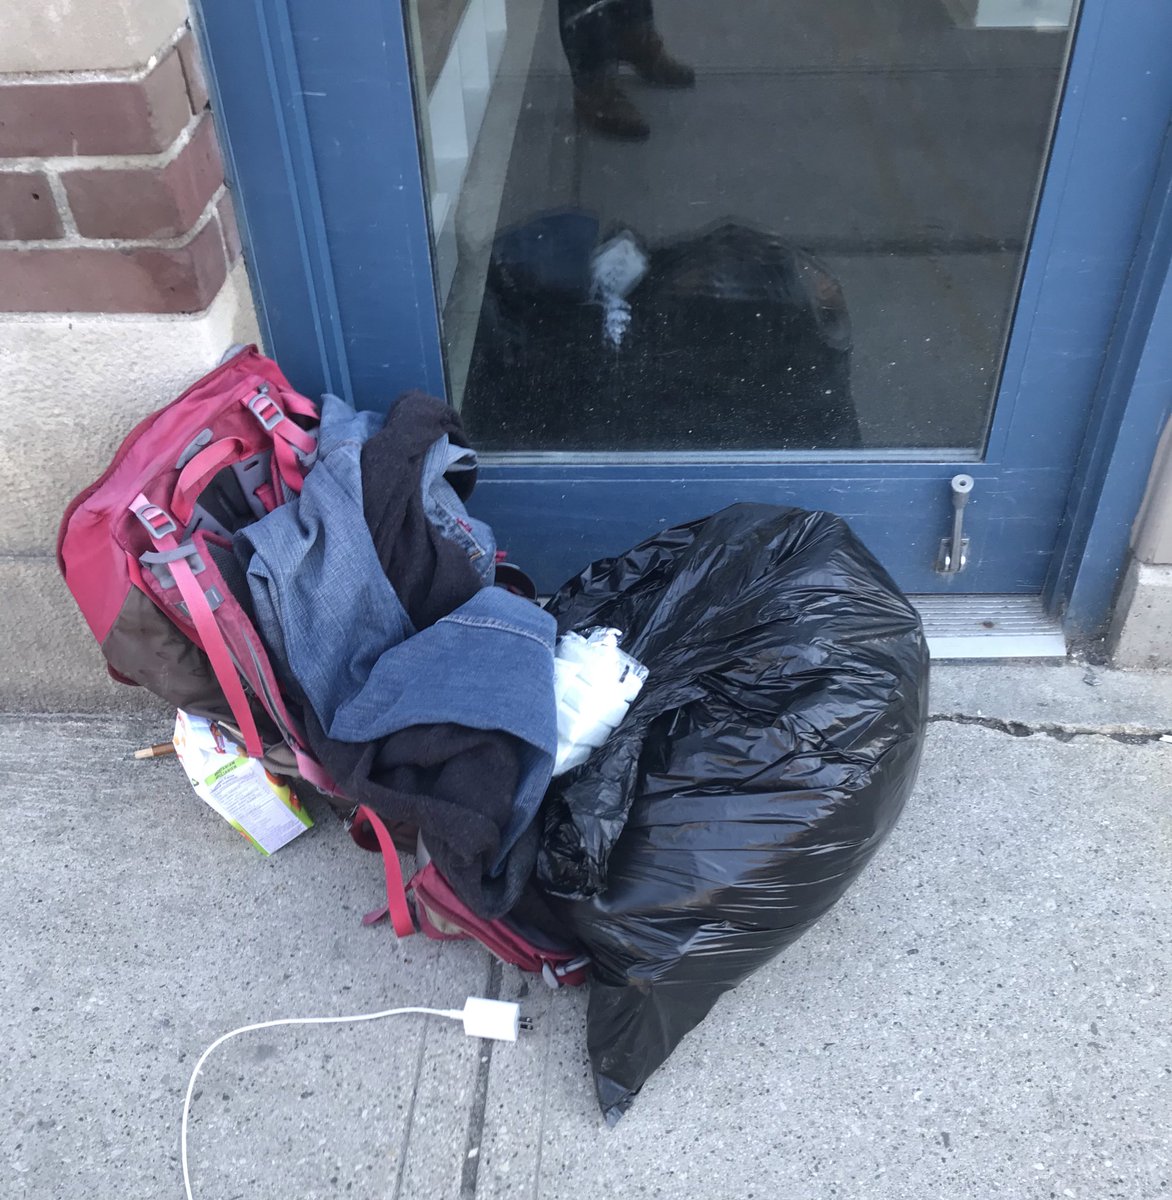 Today a landlord in  #Parkdale tried to evict a tenant who couldn’t pay his rent, and threatened to call the cops on him. Thankfully, he’d already used the tools at  http://KeepYourRent.com  to connect with neighbours who were ready to have his back. #KeepYourRent